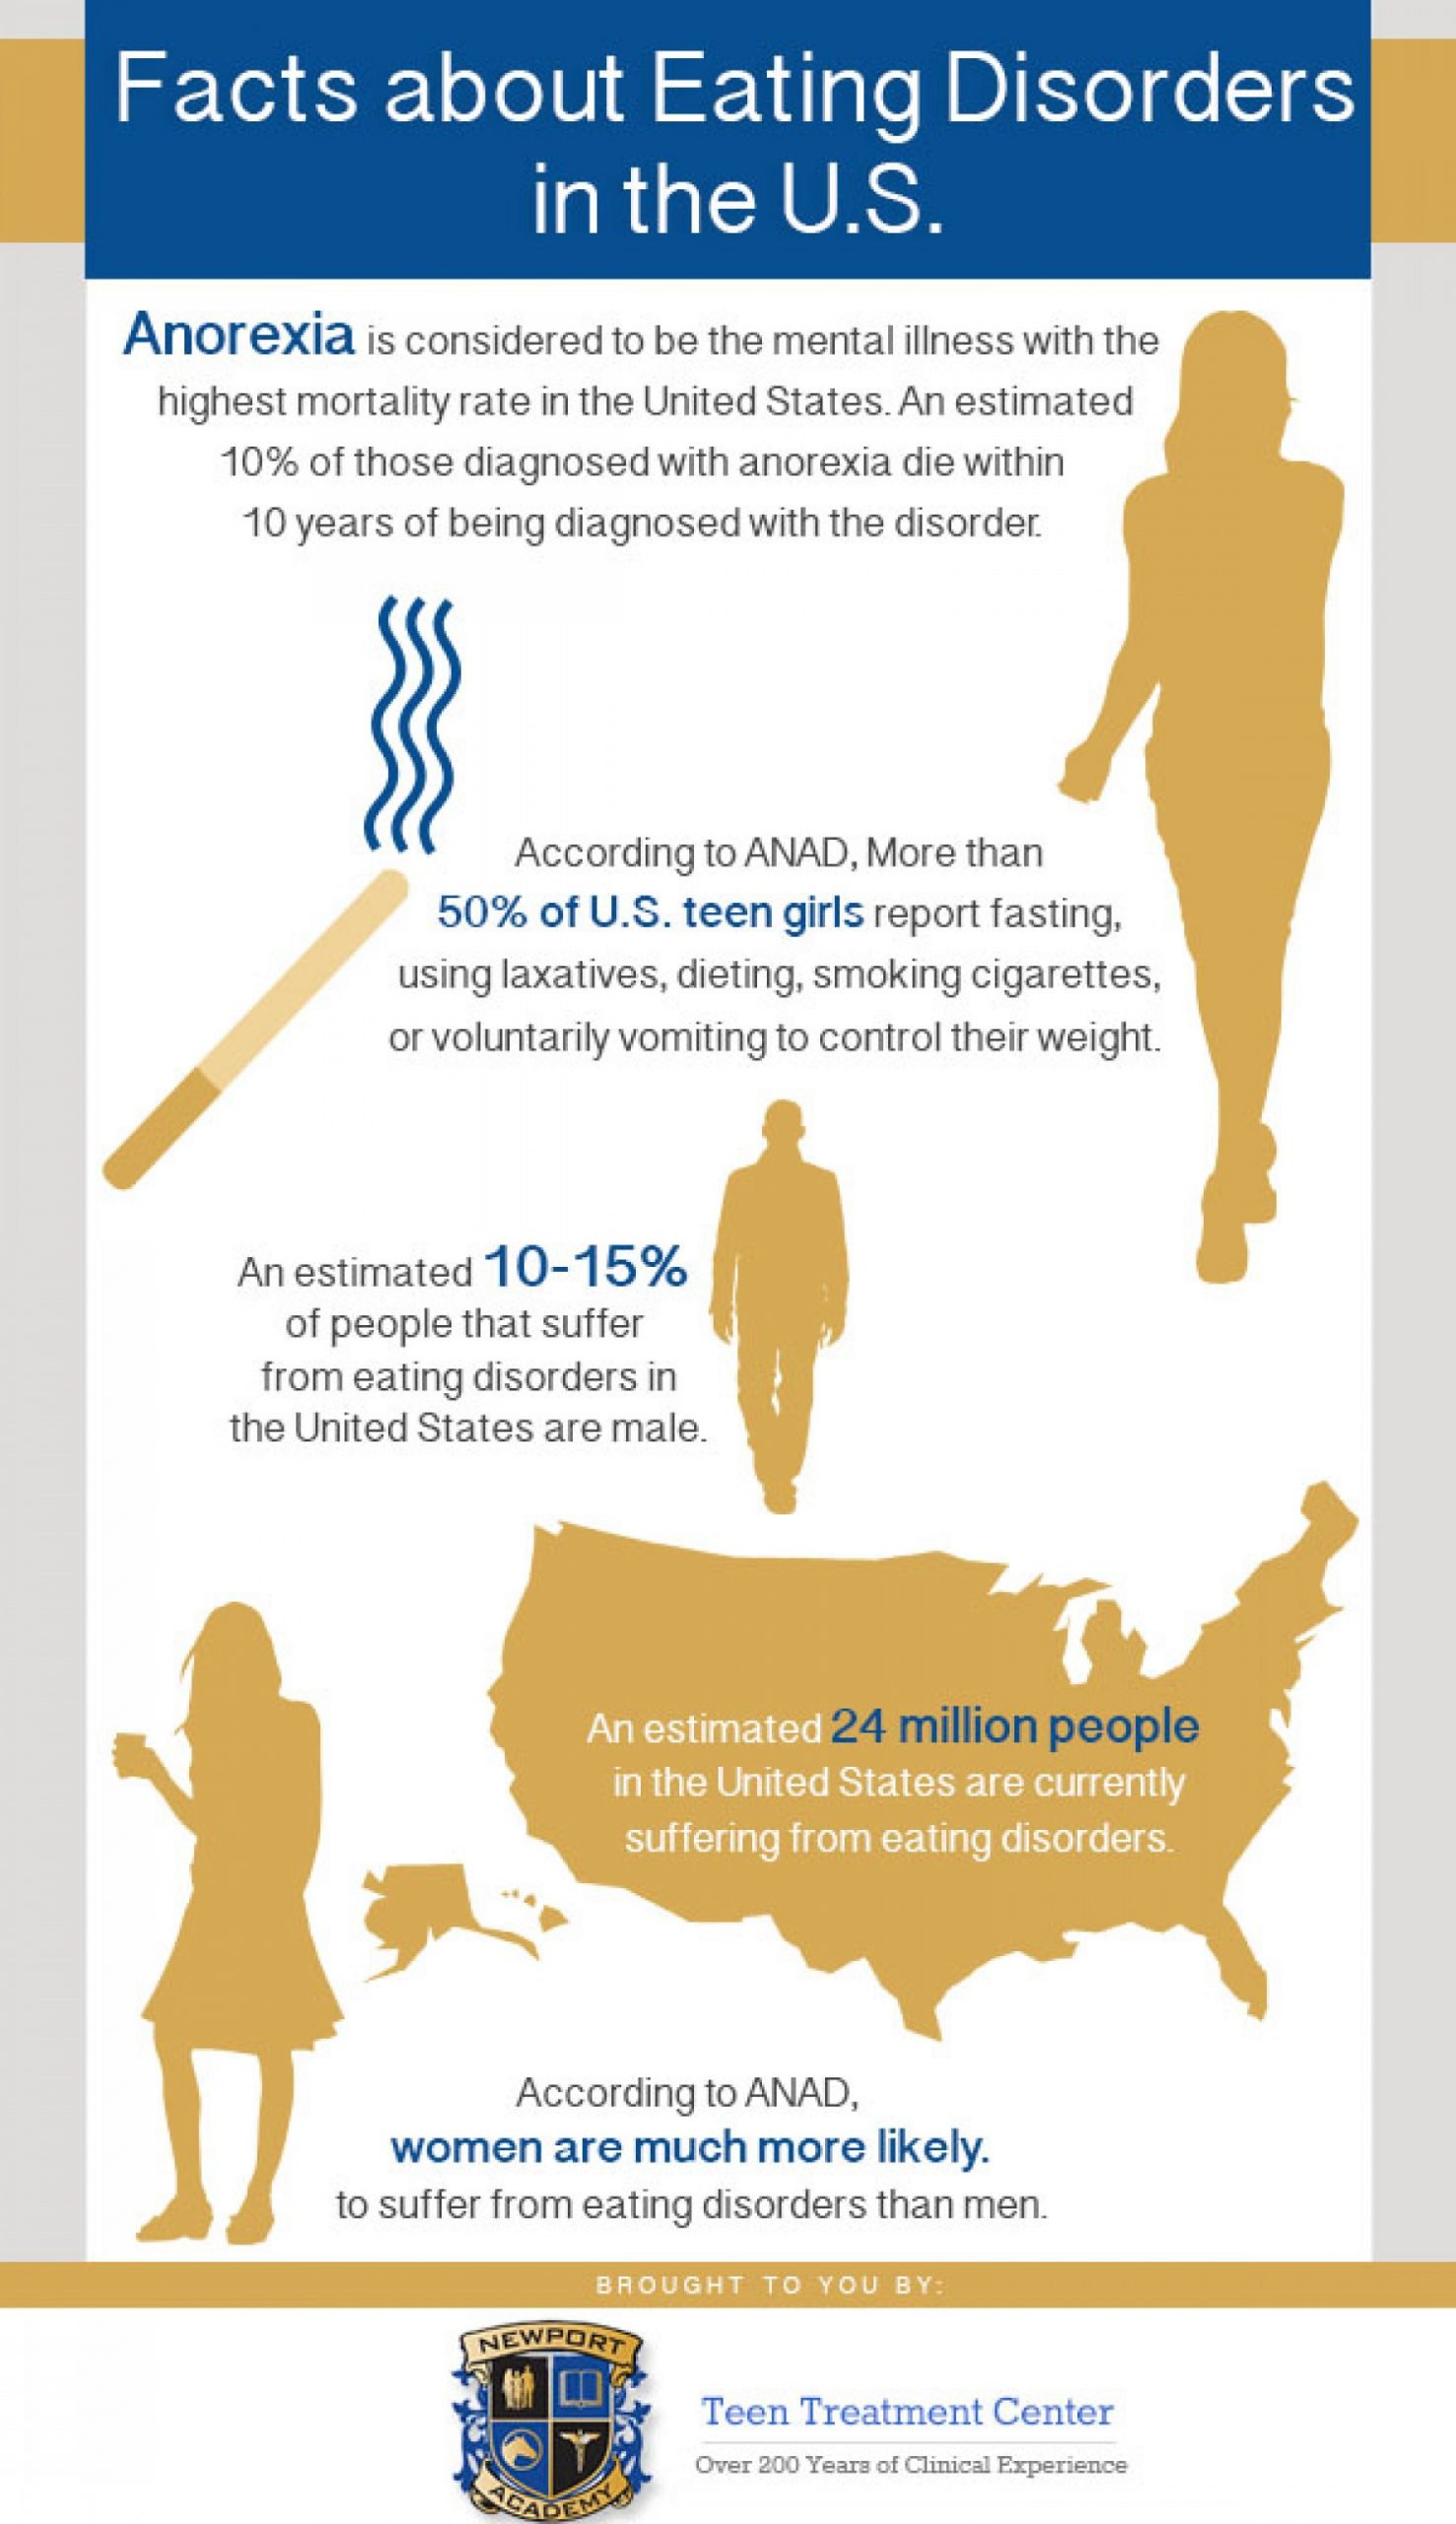 Facts About Eating Disorders in the U.S.